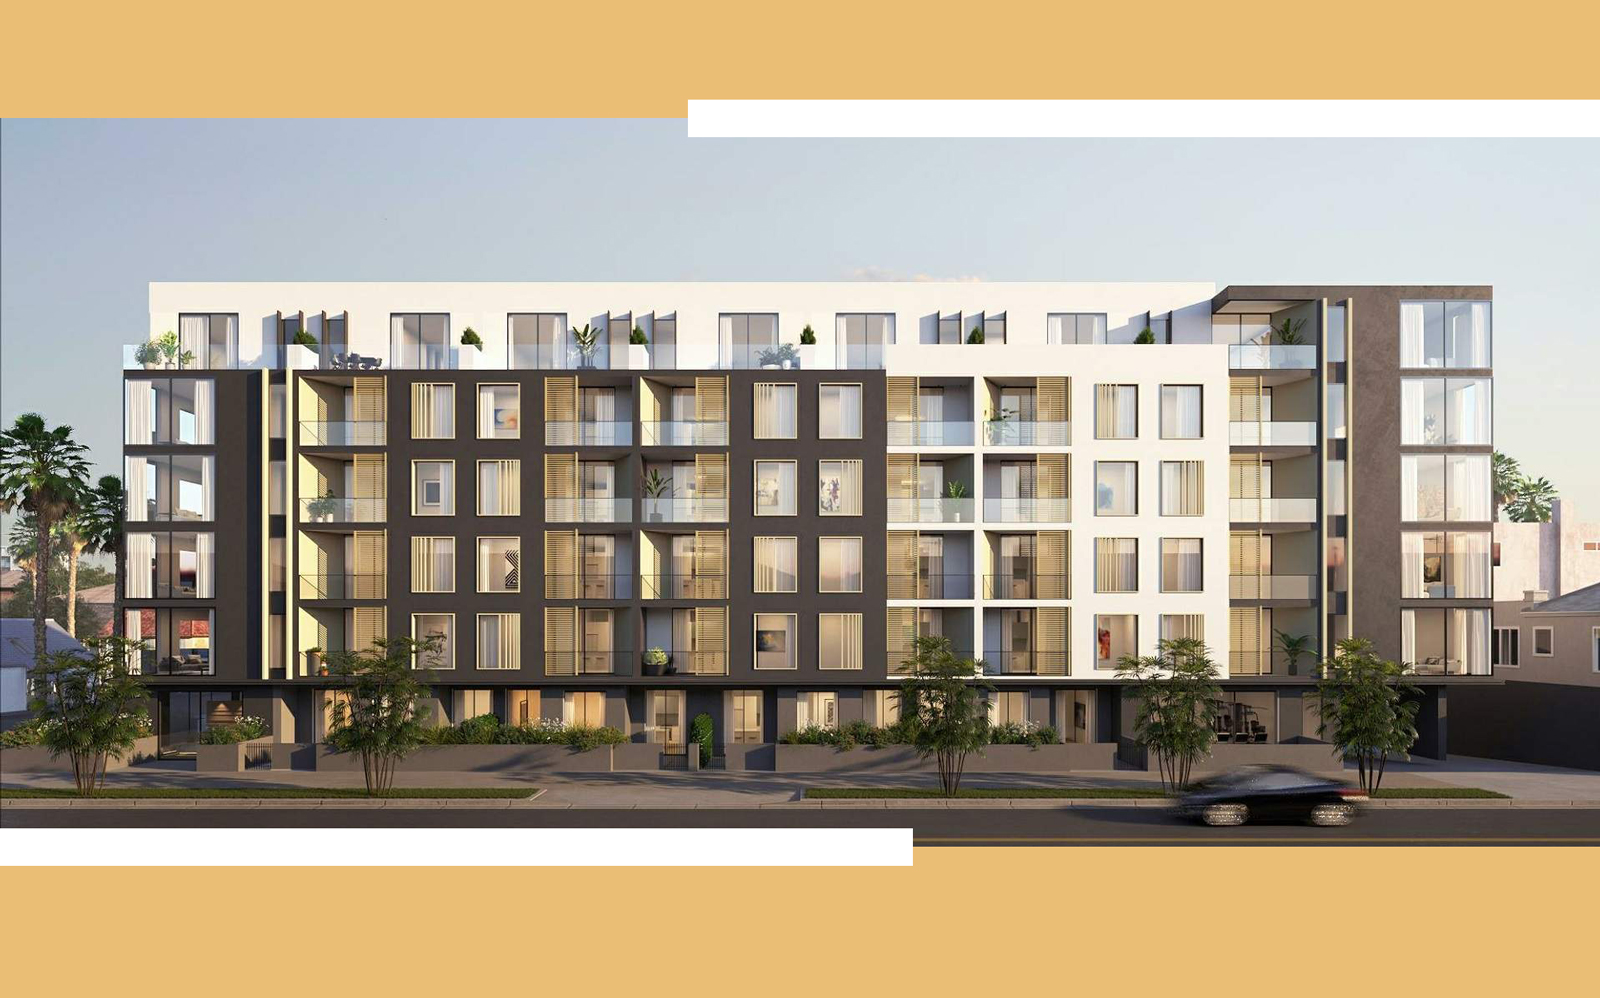 A rendering of the 88-unit apartment complex in Koreatown (Rendering via Kevin Tsai Architecture)